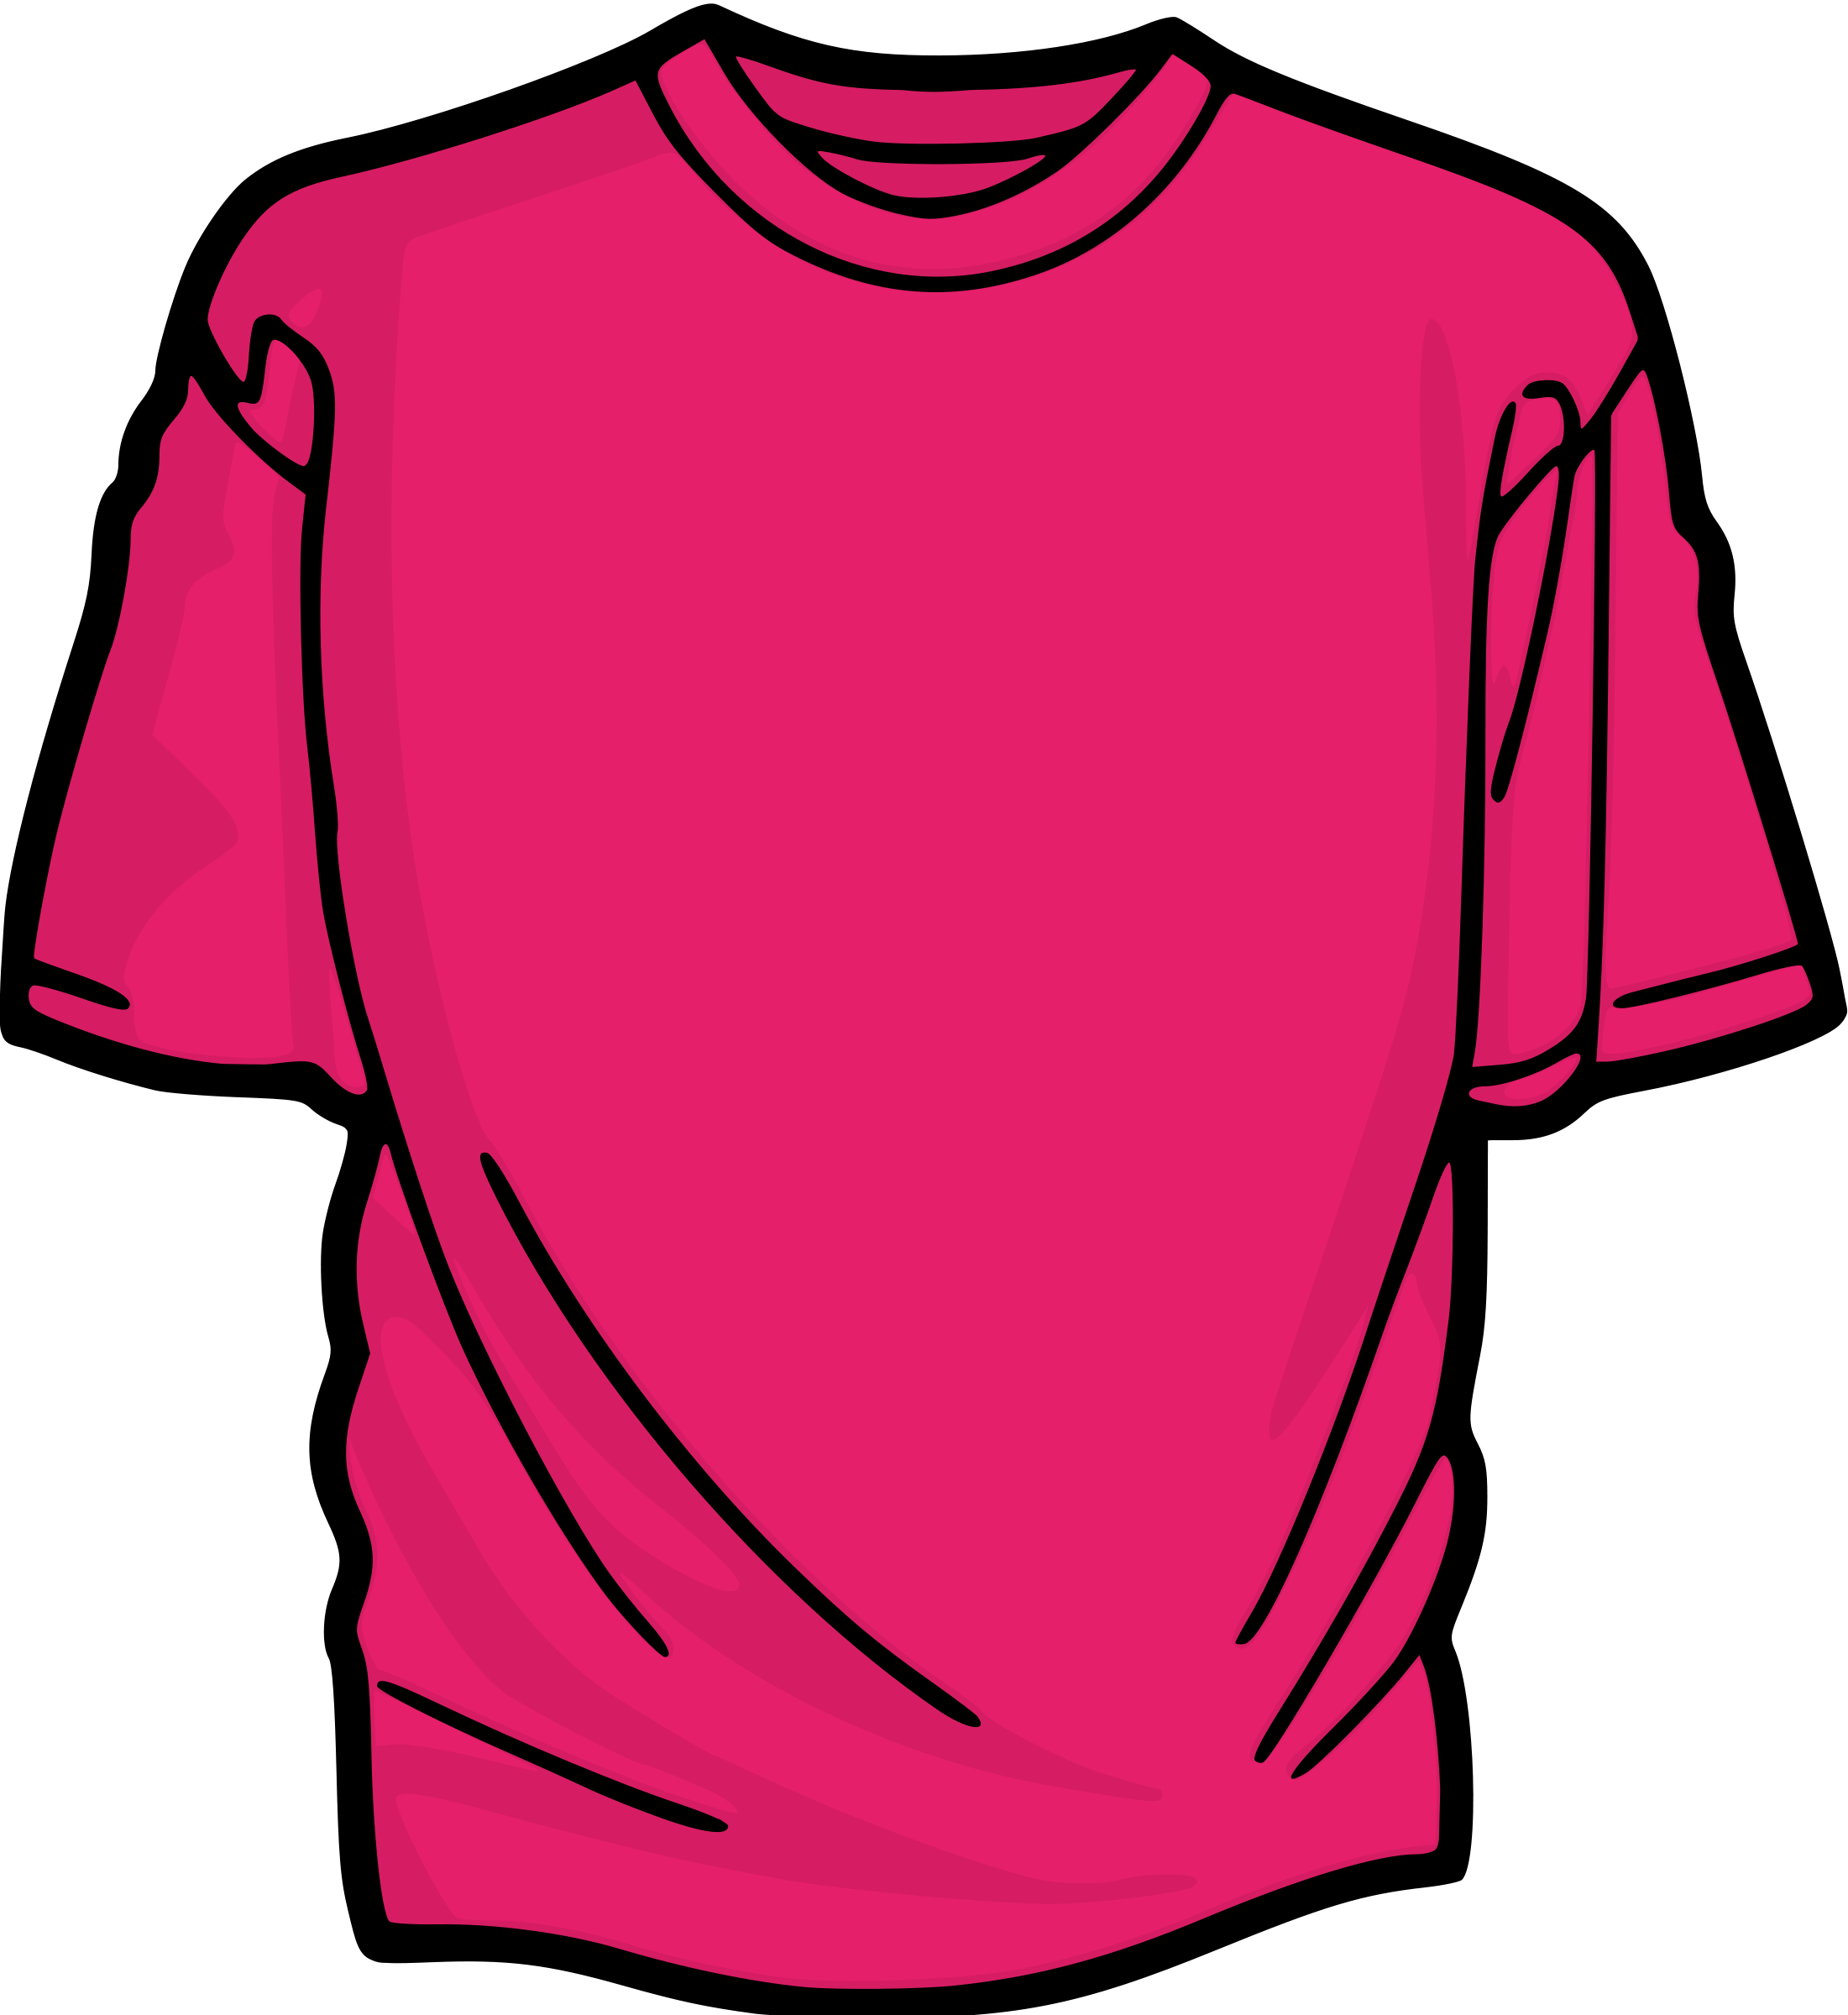 Clipart Design T Shirt Clipart Design T Shirt Transparent Free For Download On Webstockreview 2020 - t shirt11png roblox